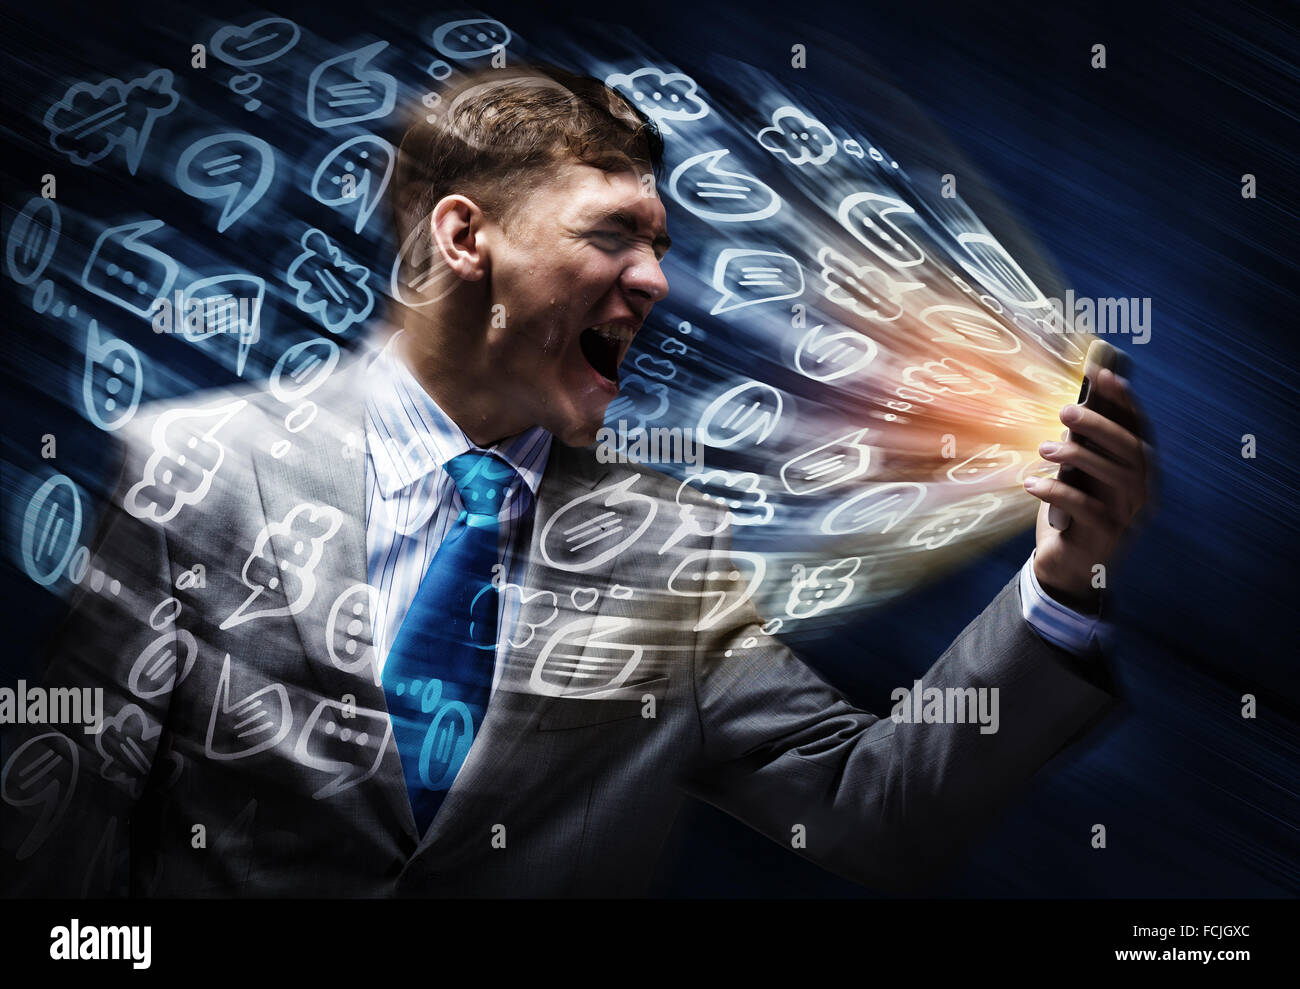 Angry businessman screaming furiously in mobile phone Stock Photo